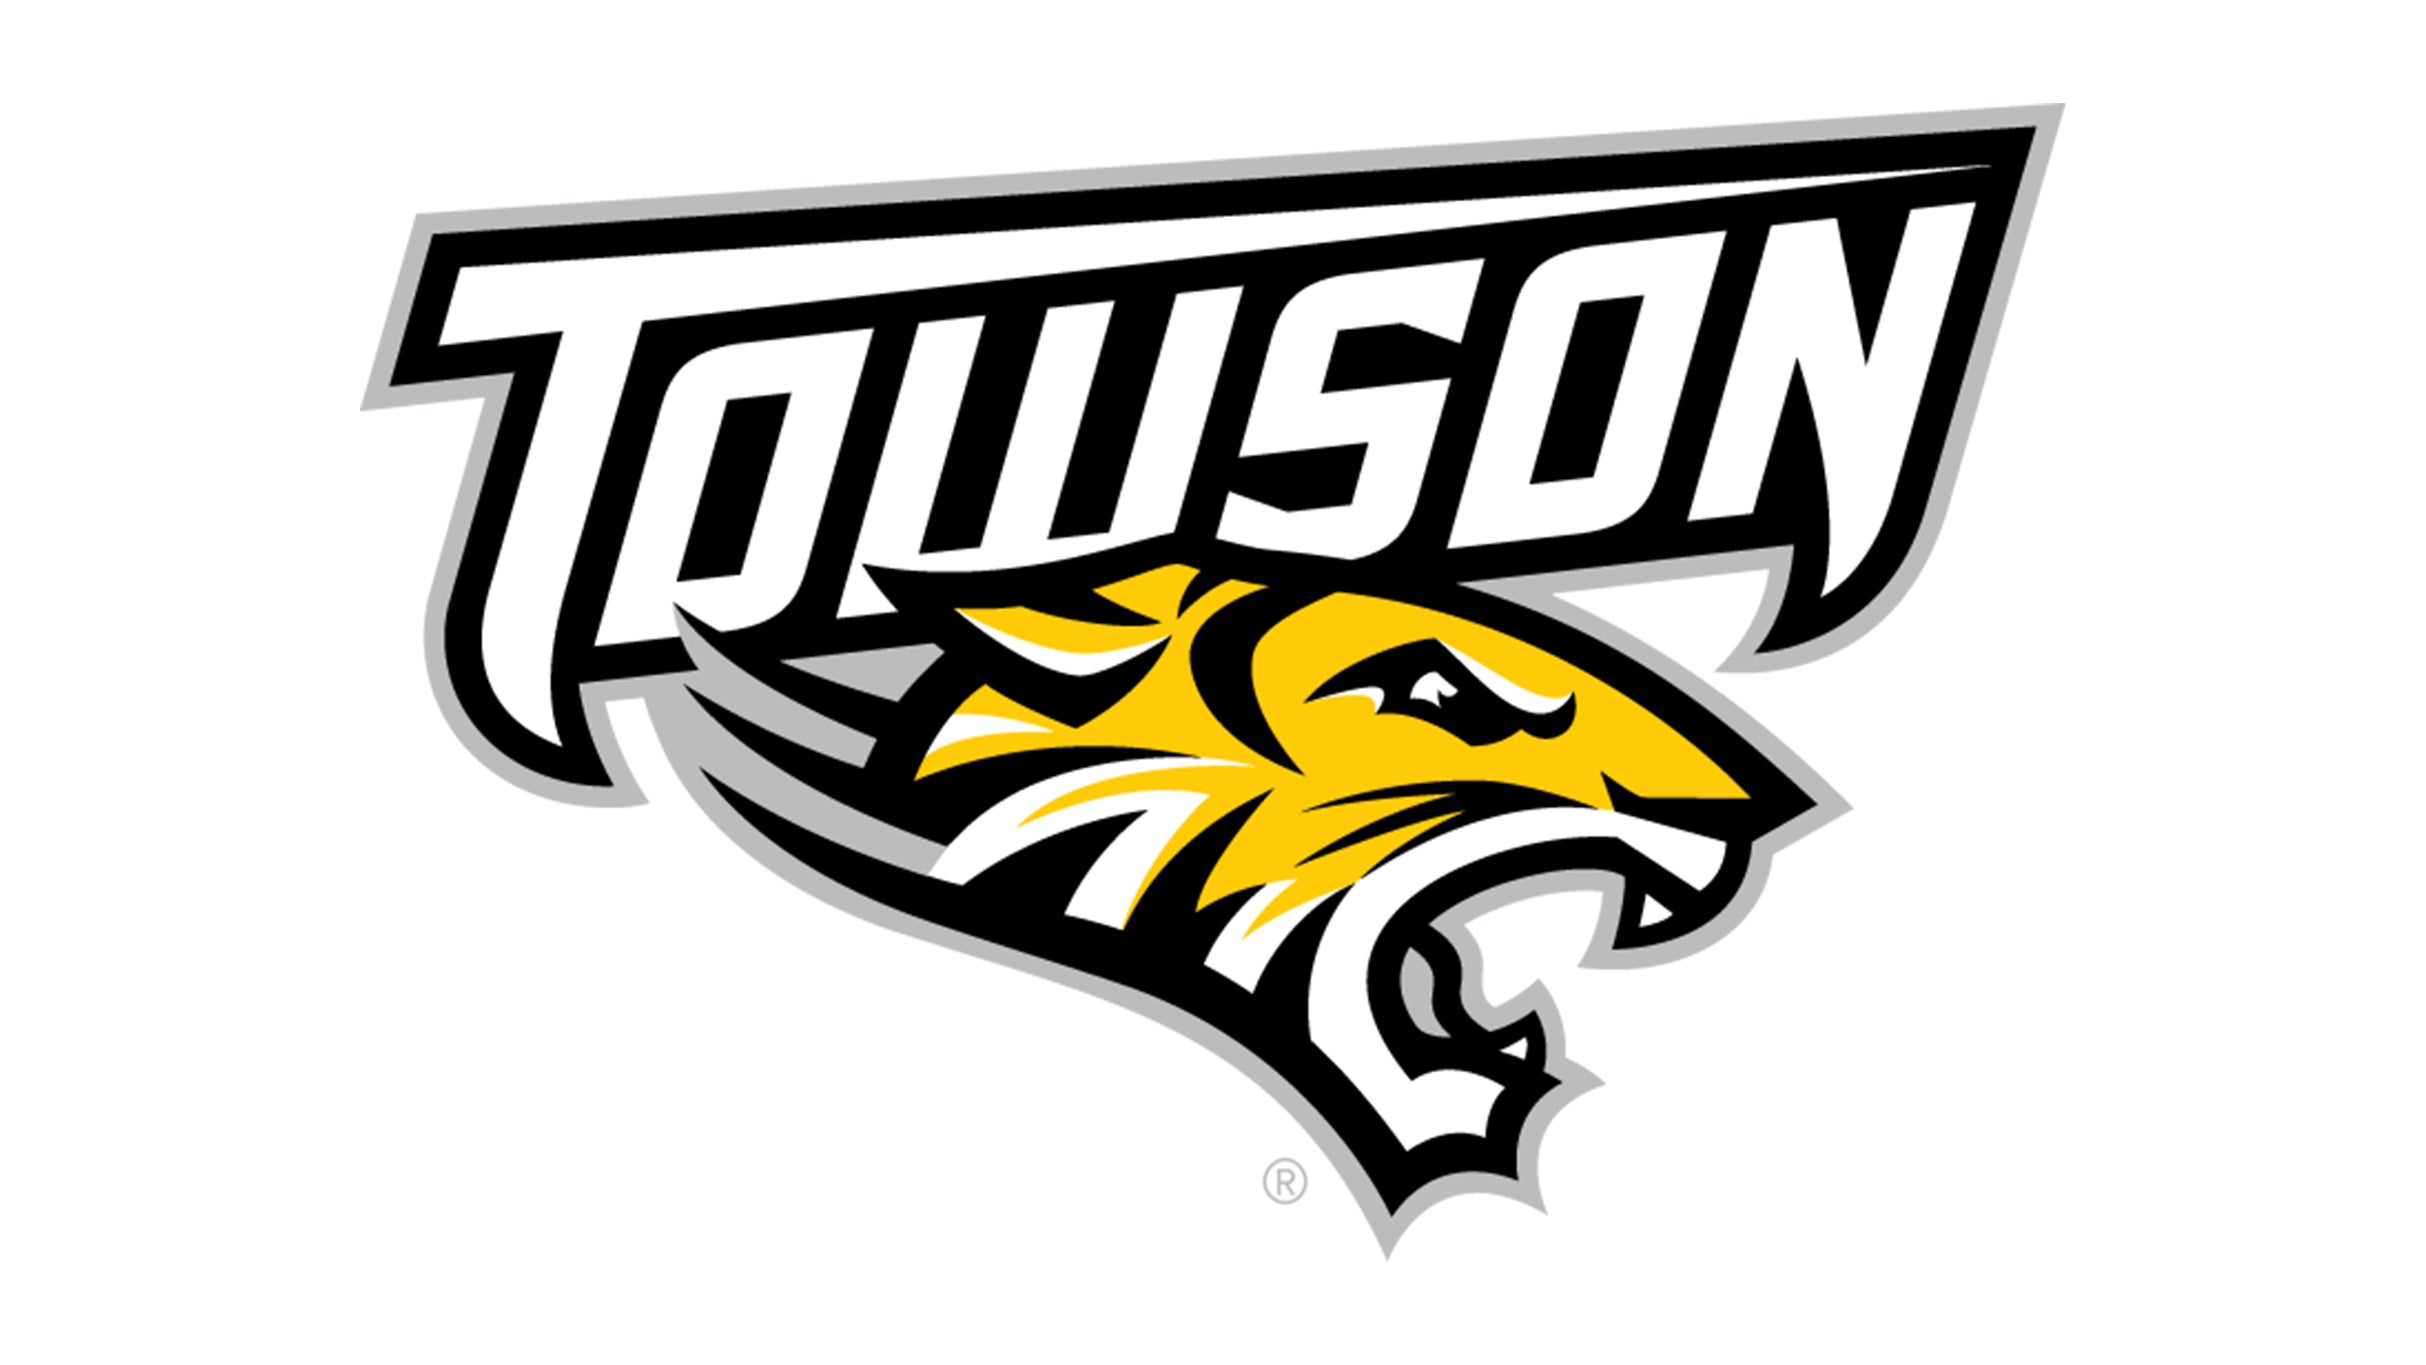 Towson University Tigers Mens Basketball vs. Campbell University Fighting Camels in Towson promo photo for $10 Band presale offer code